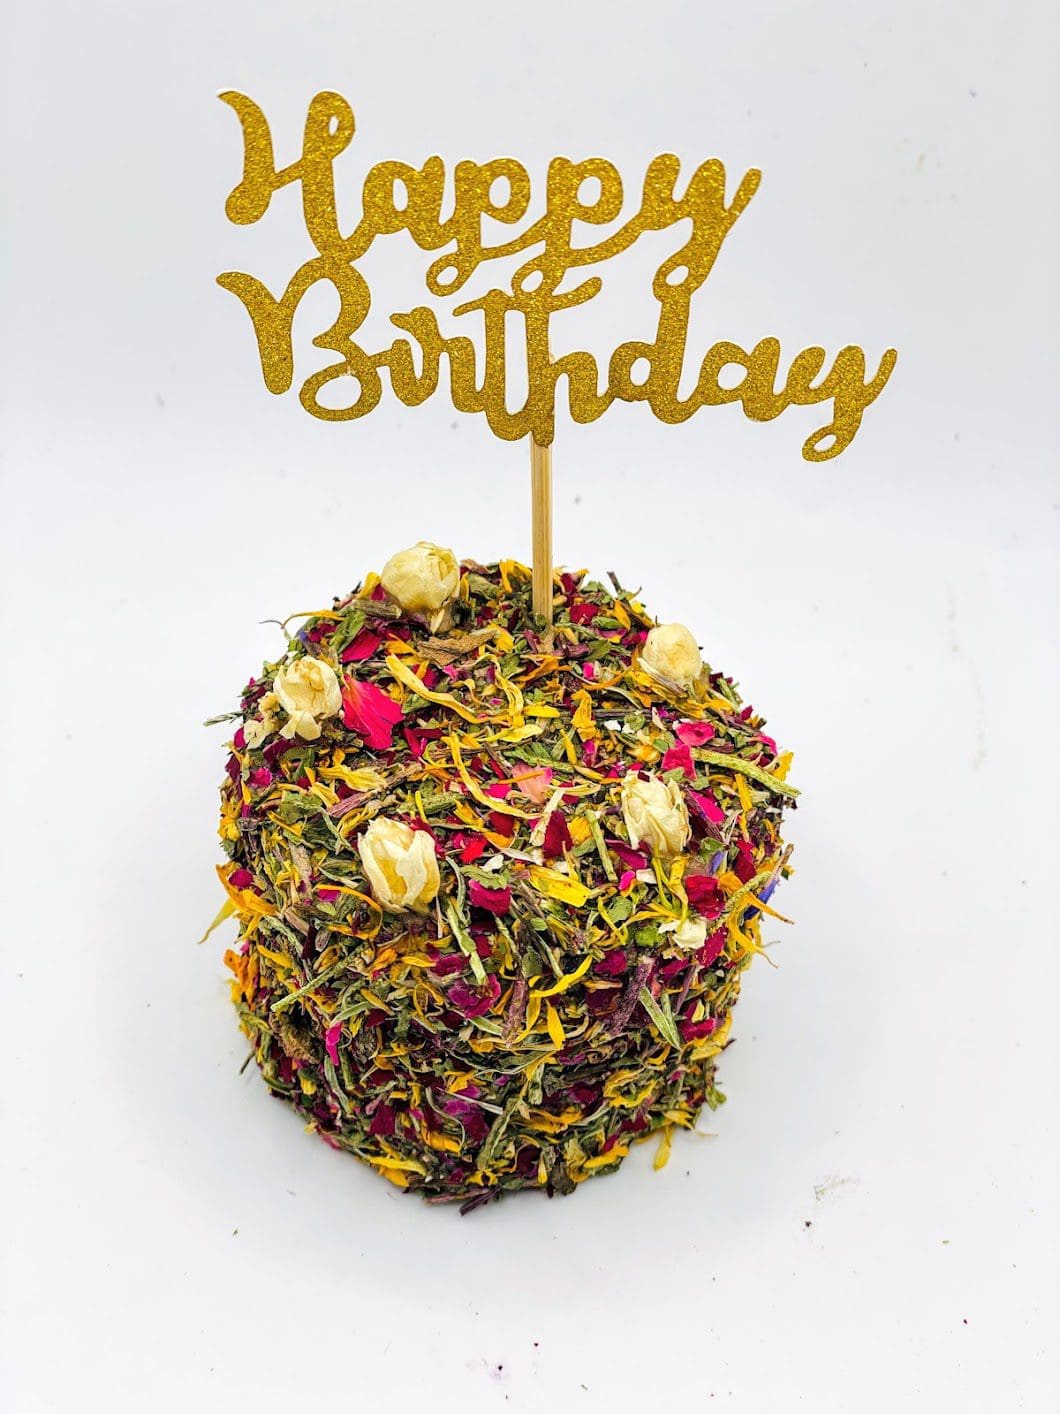 3 Layers Timothy Hay Floral Happy Birthday and Special Occasions Cake With Petals Forage Treat For Rabbit, Hamsters, Guinea Pigs, Chinchillas & Small Rodents